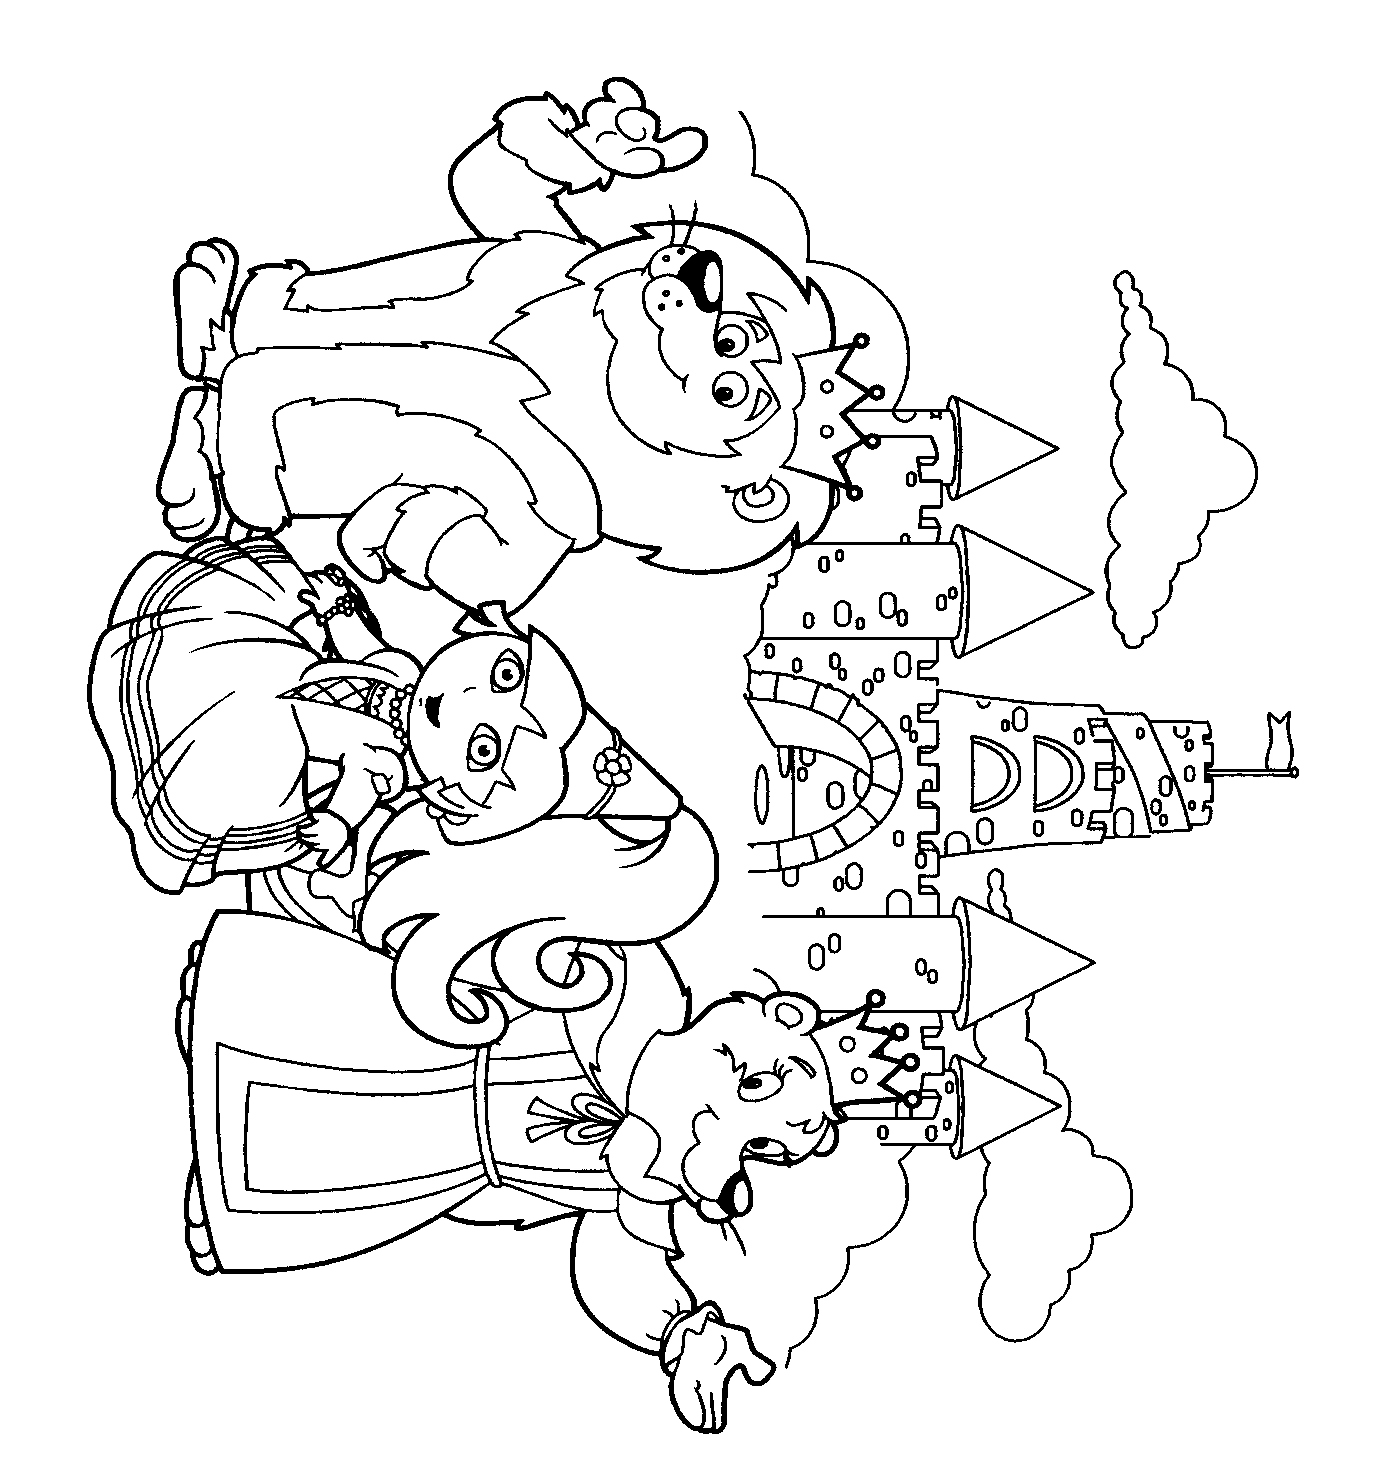 Nick Jr Coloring Pages (11) - Coloringkids.org